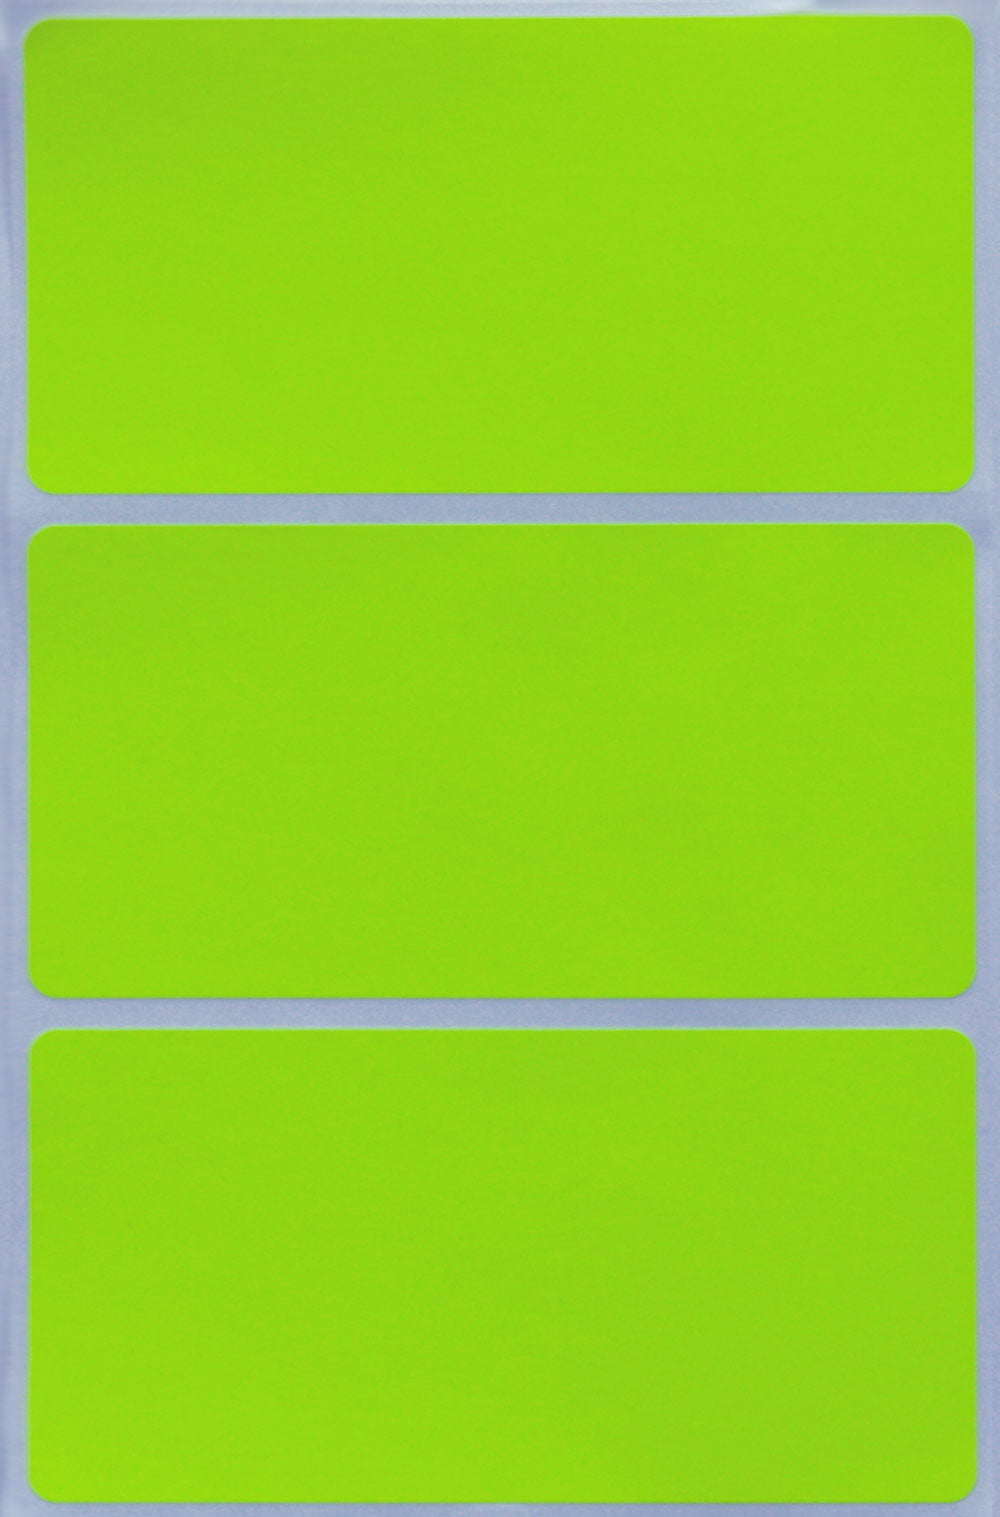 150 Packs 102 mm x 51 mm Royal Green Rectangular Stickers in Neon Yellow 4 inch X 2 inch